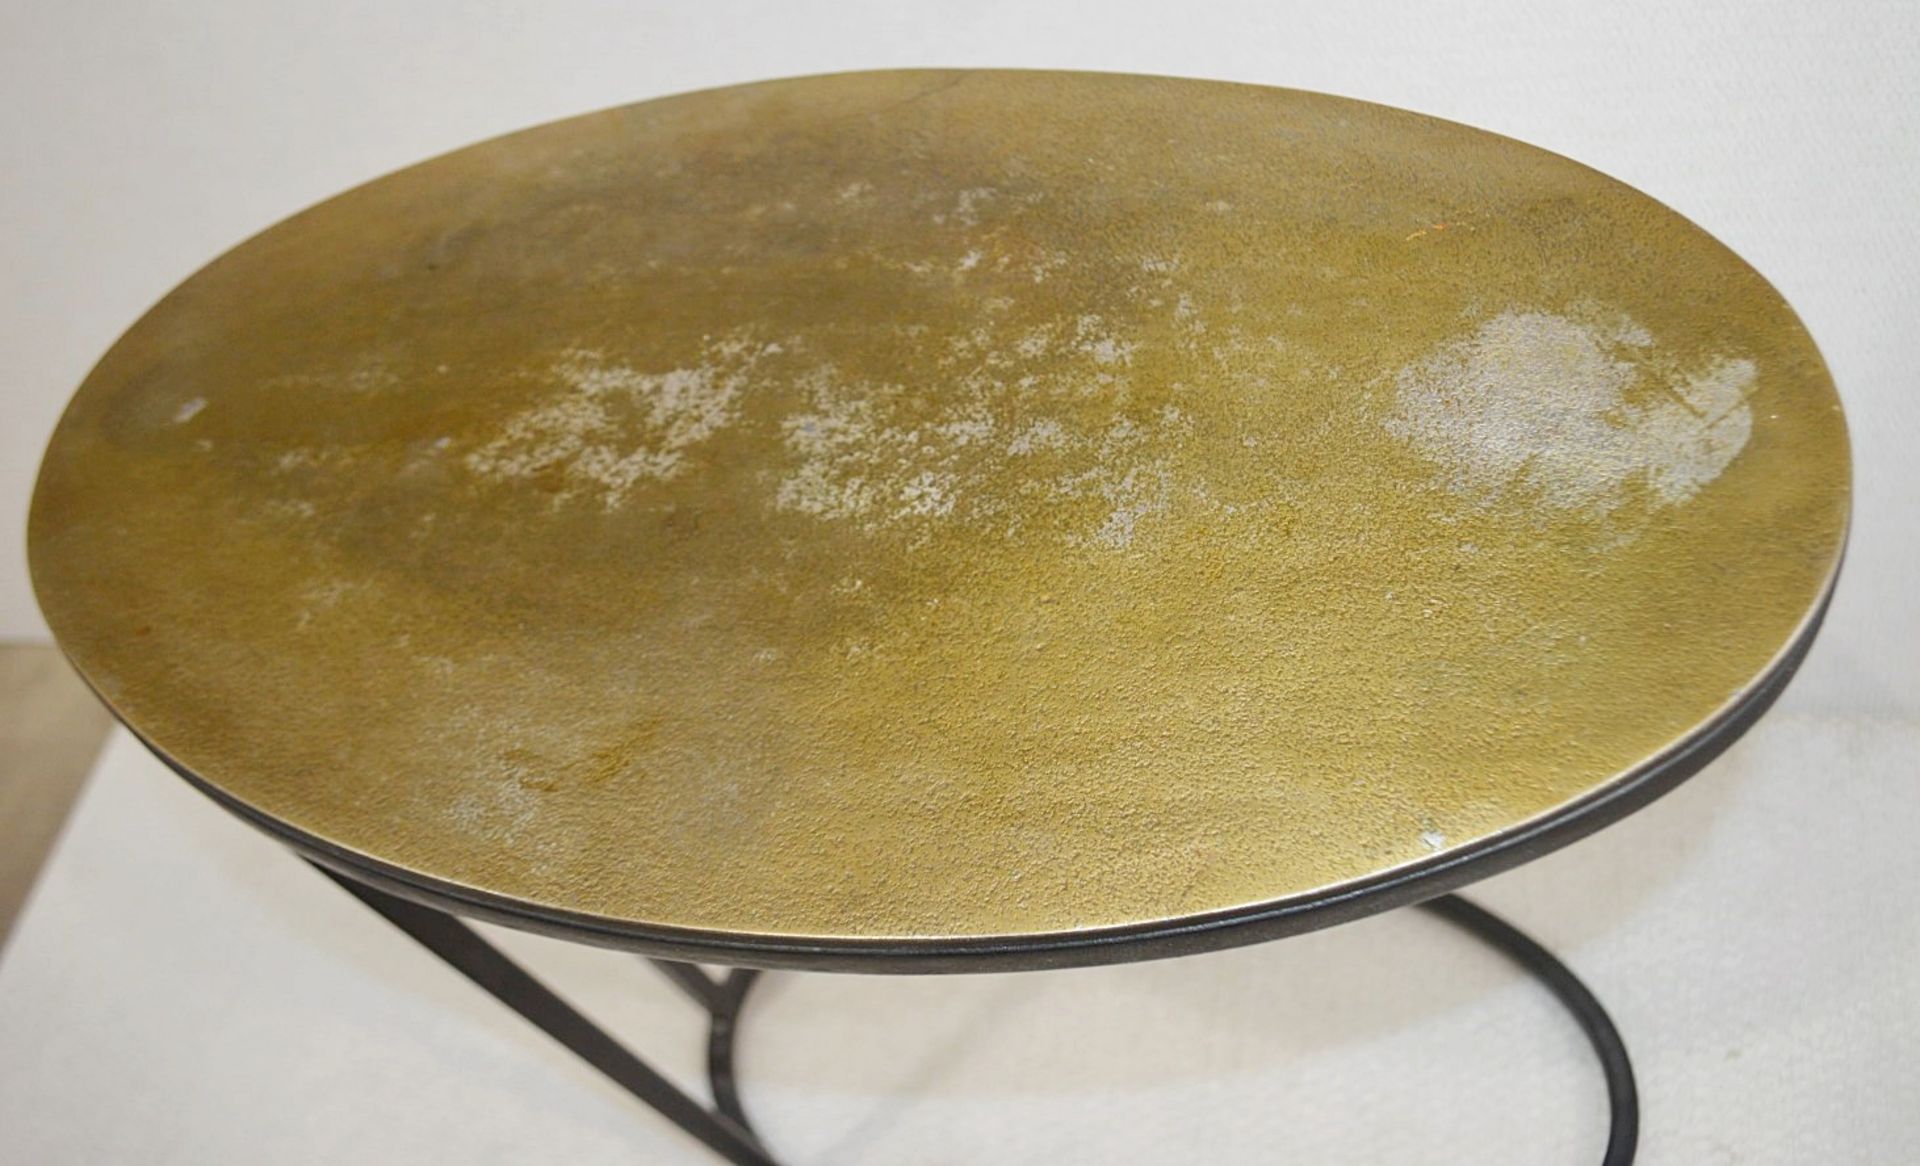 A Pair Of Elegant Oval Shaped Side Tables With Slim Metal Bases And Textured Brass Finish - - Image 2 of 4